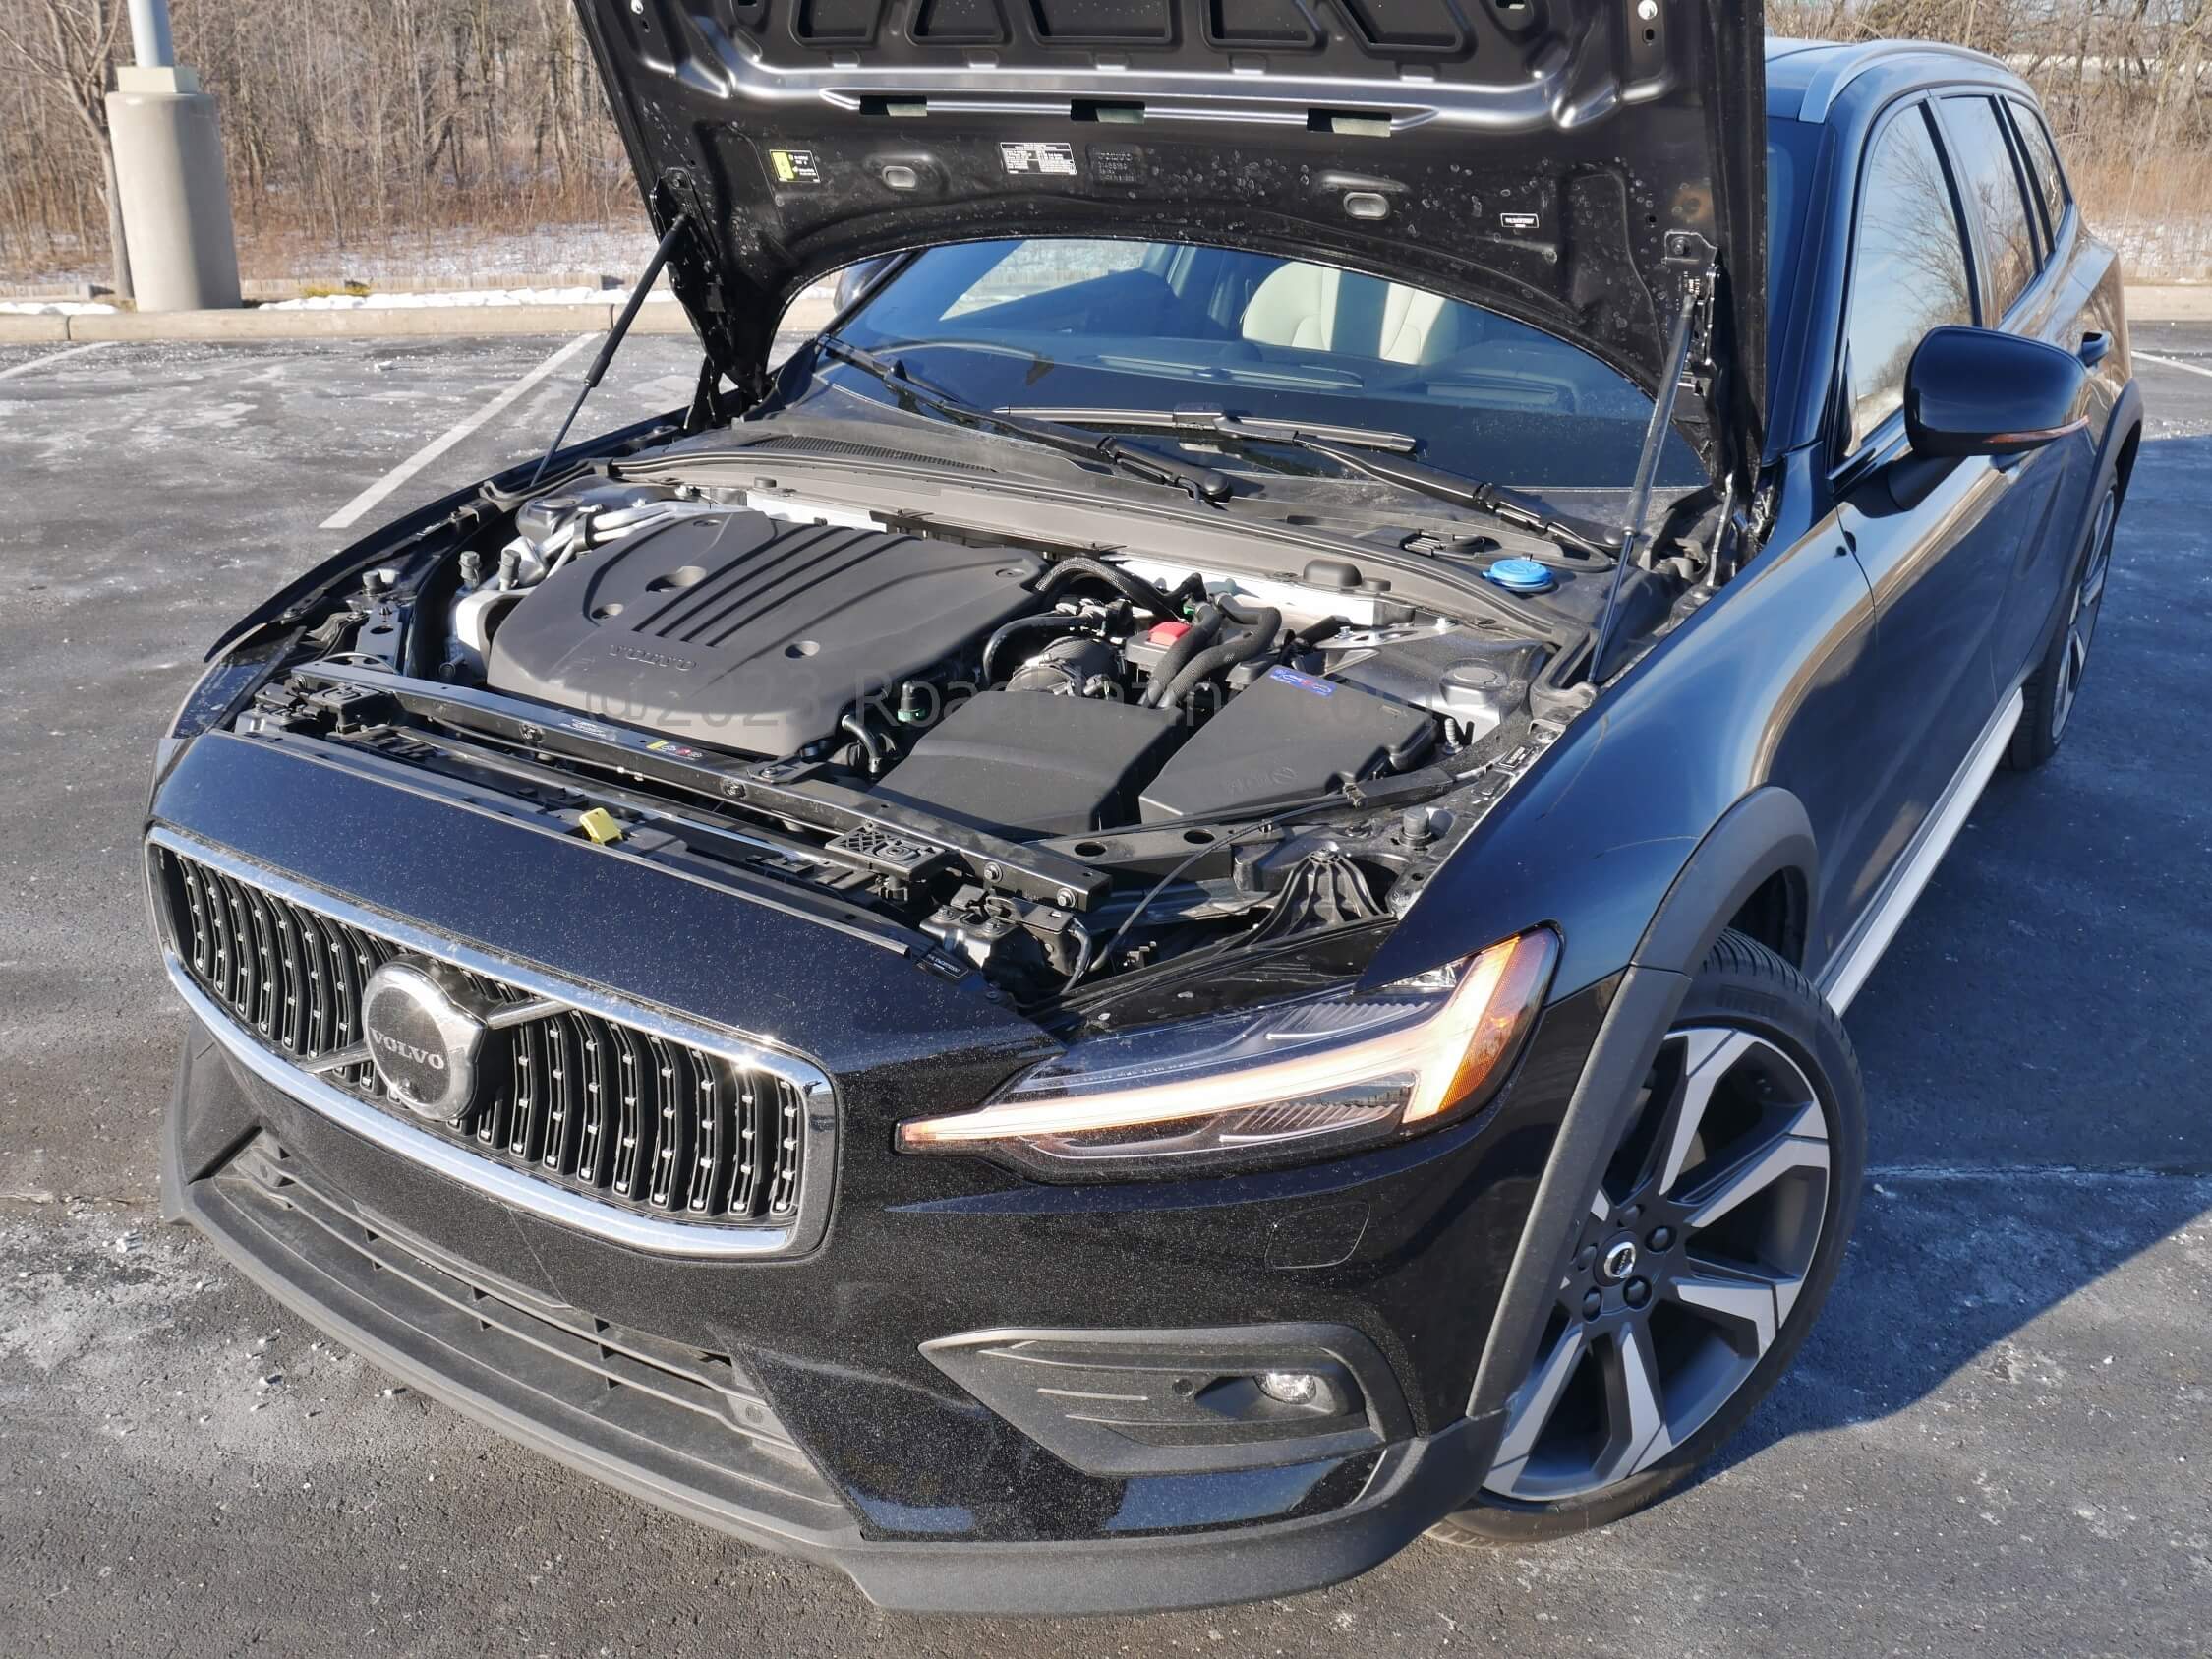 2023 Volvo V60 Cross Country B5 Ultimate AWD: turbo four gas engine picks up 13 hp from 48V electric motor mated to 8-spd automatic + Haldex style AWD w/ off-road mode